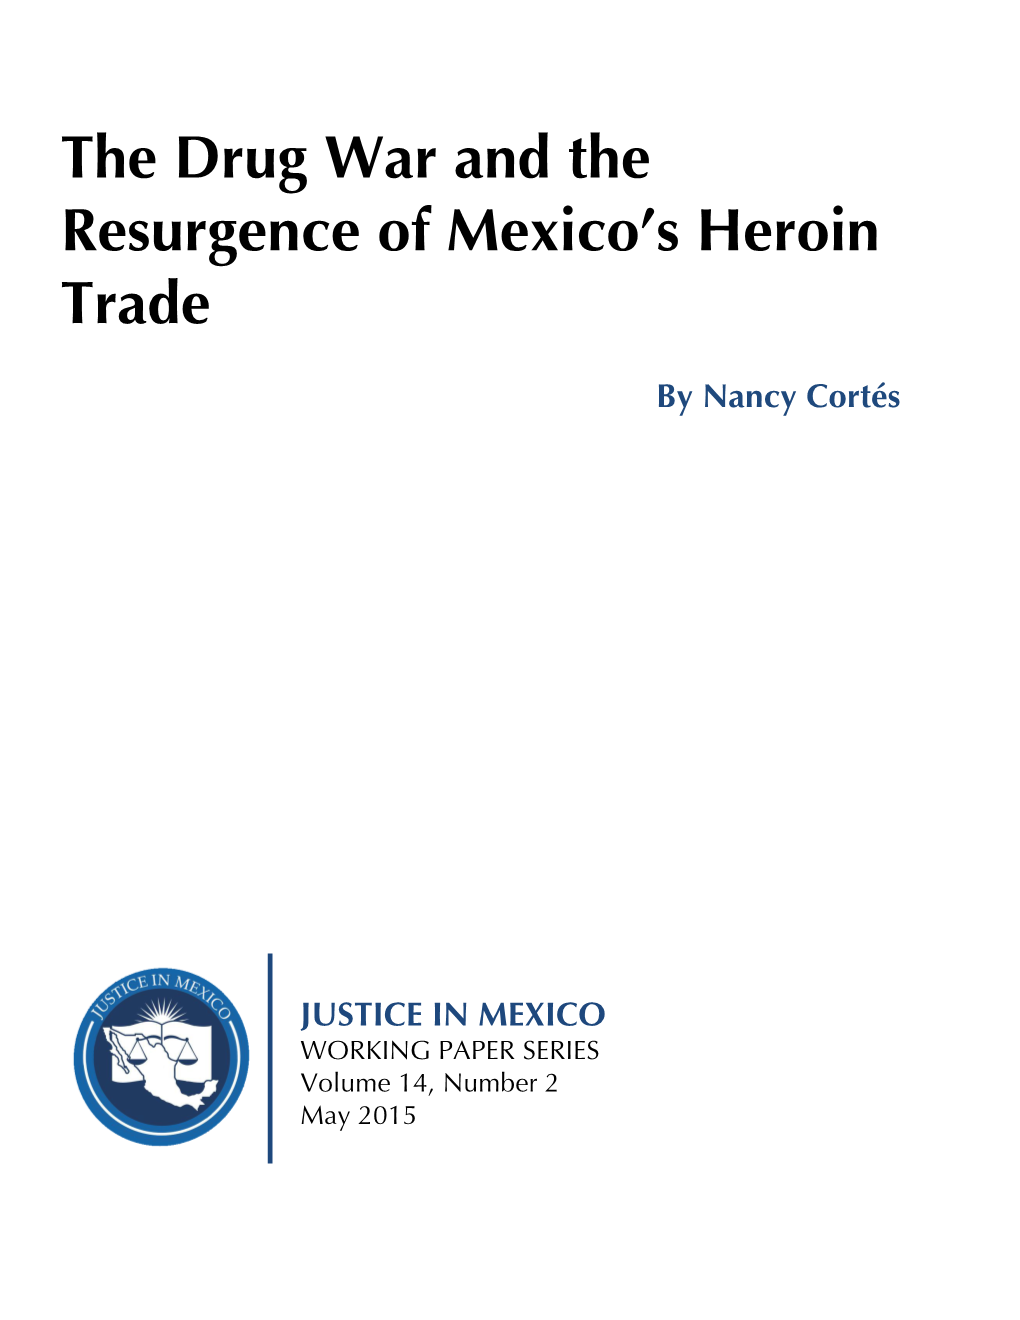 The Drug War and the Resurgence of Mexico's Heroin Trade